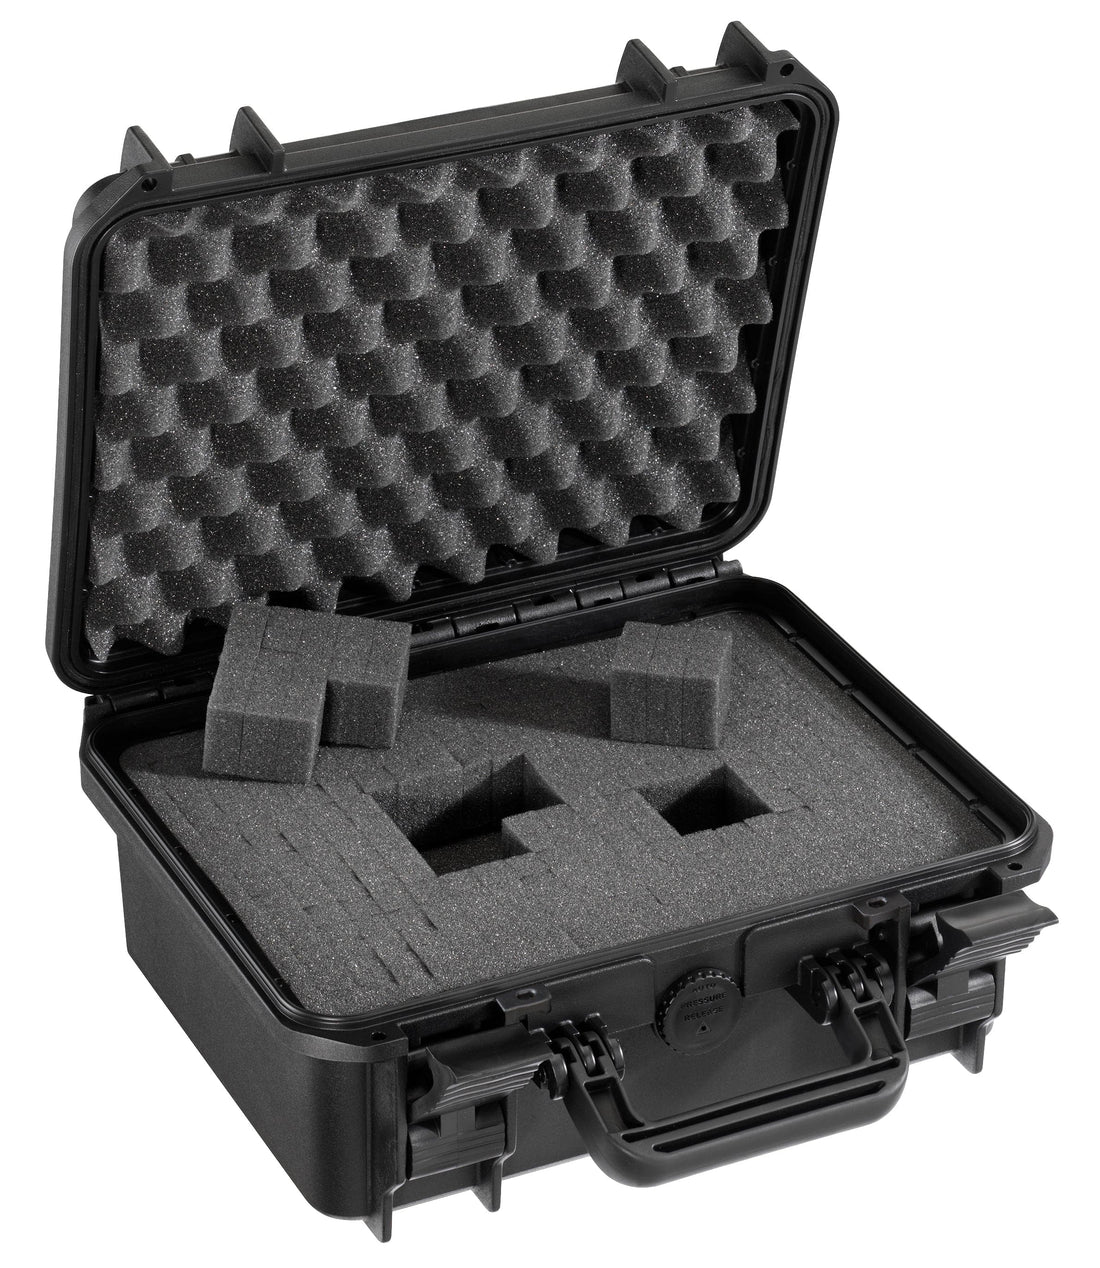 CASE DIMENSIONS 258 X 243 X H 117.5 MM - WITH CUBED SPONGES - best price from Maltashopper.com BR400002890